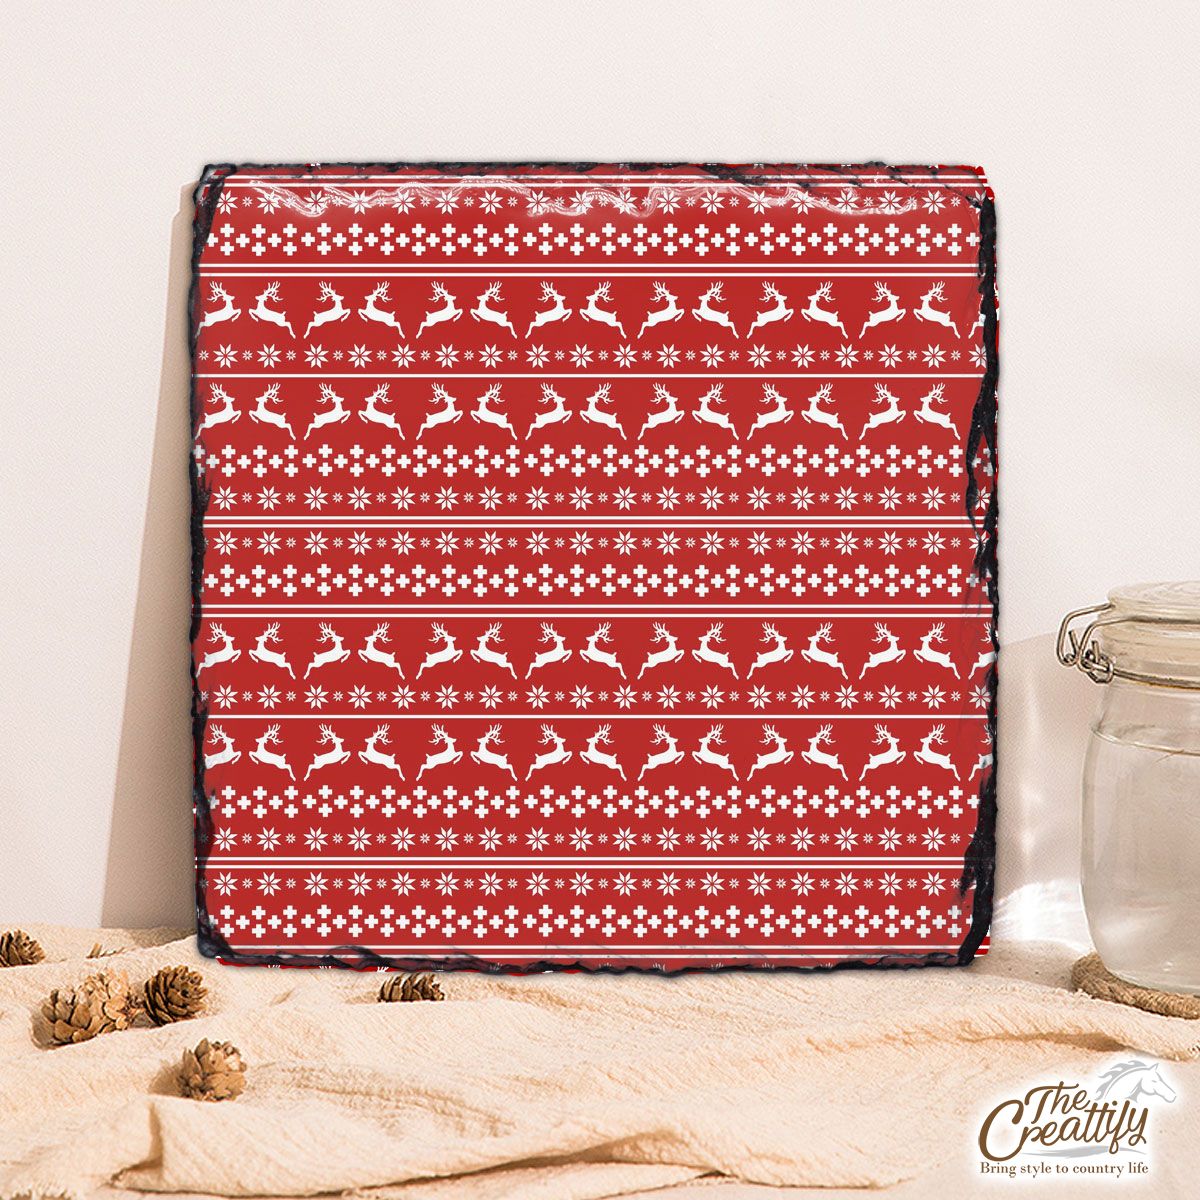 Christmas Reindeer, Snowflake Pattern Square Lithograph